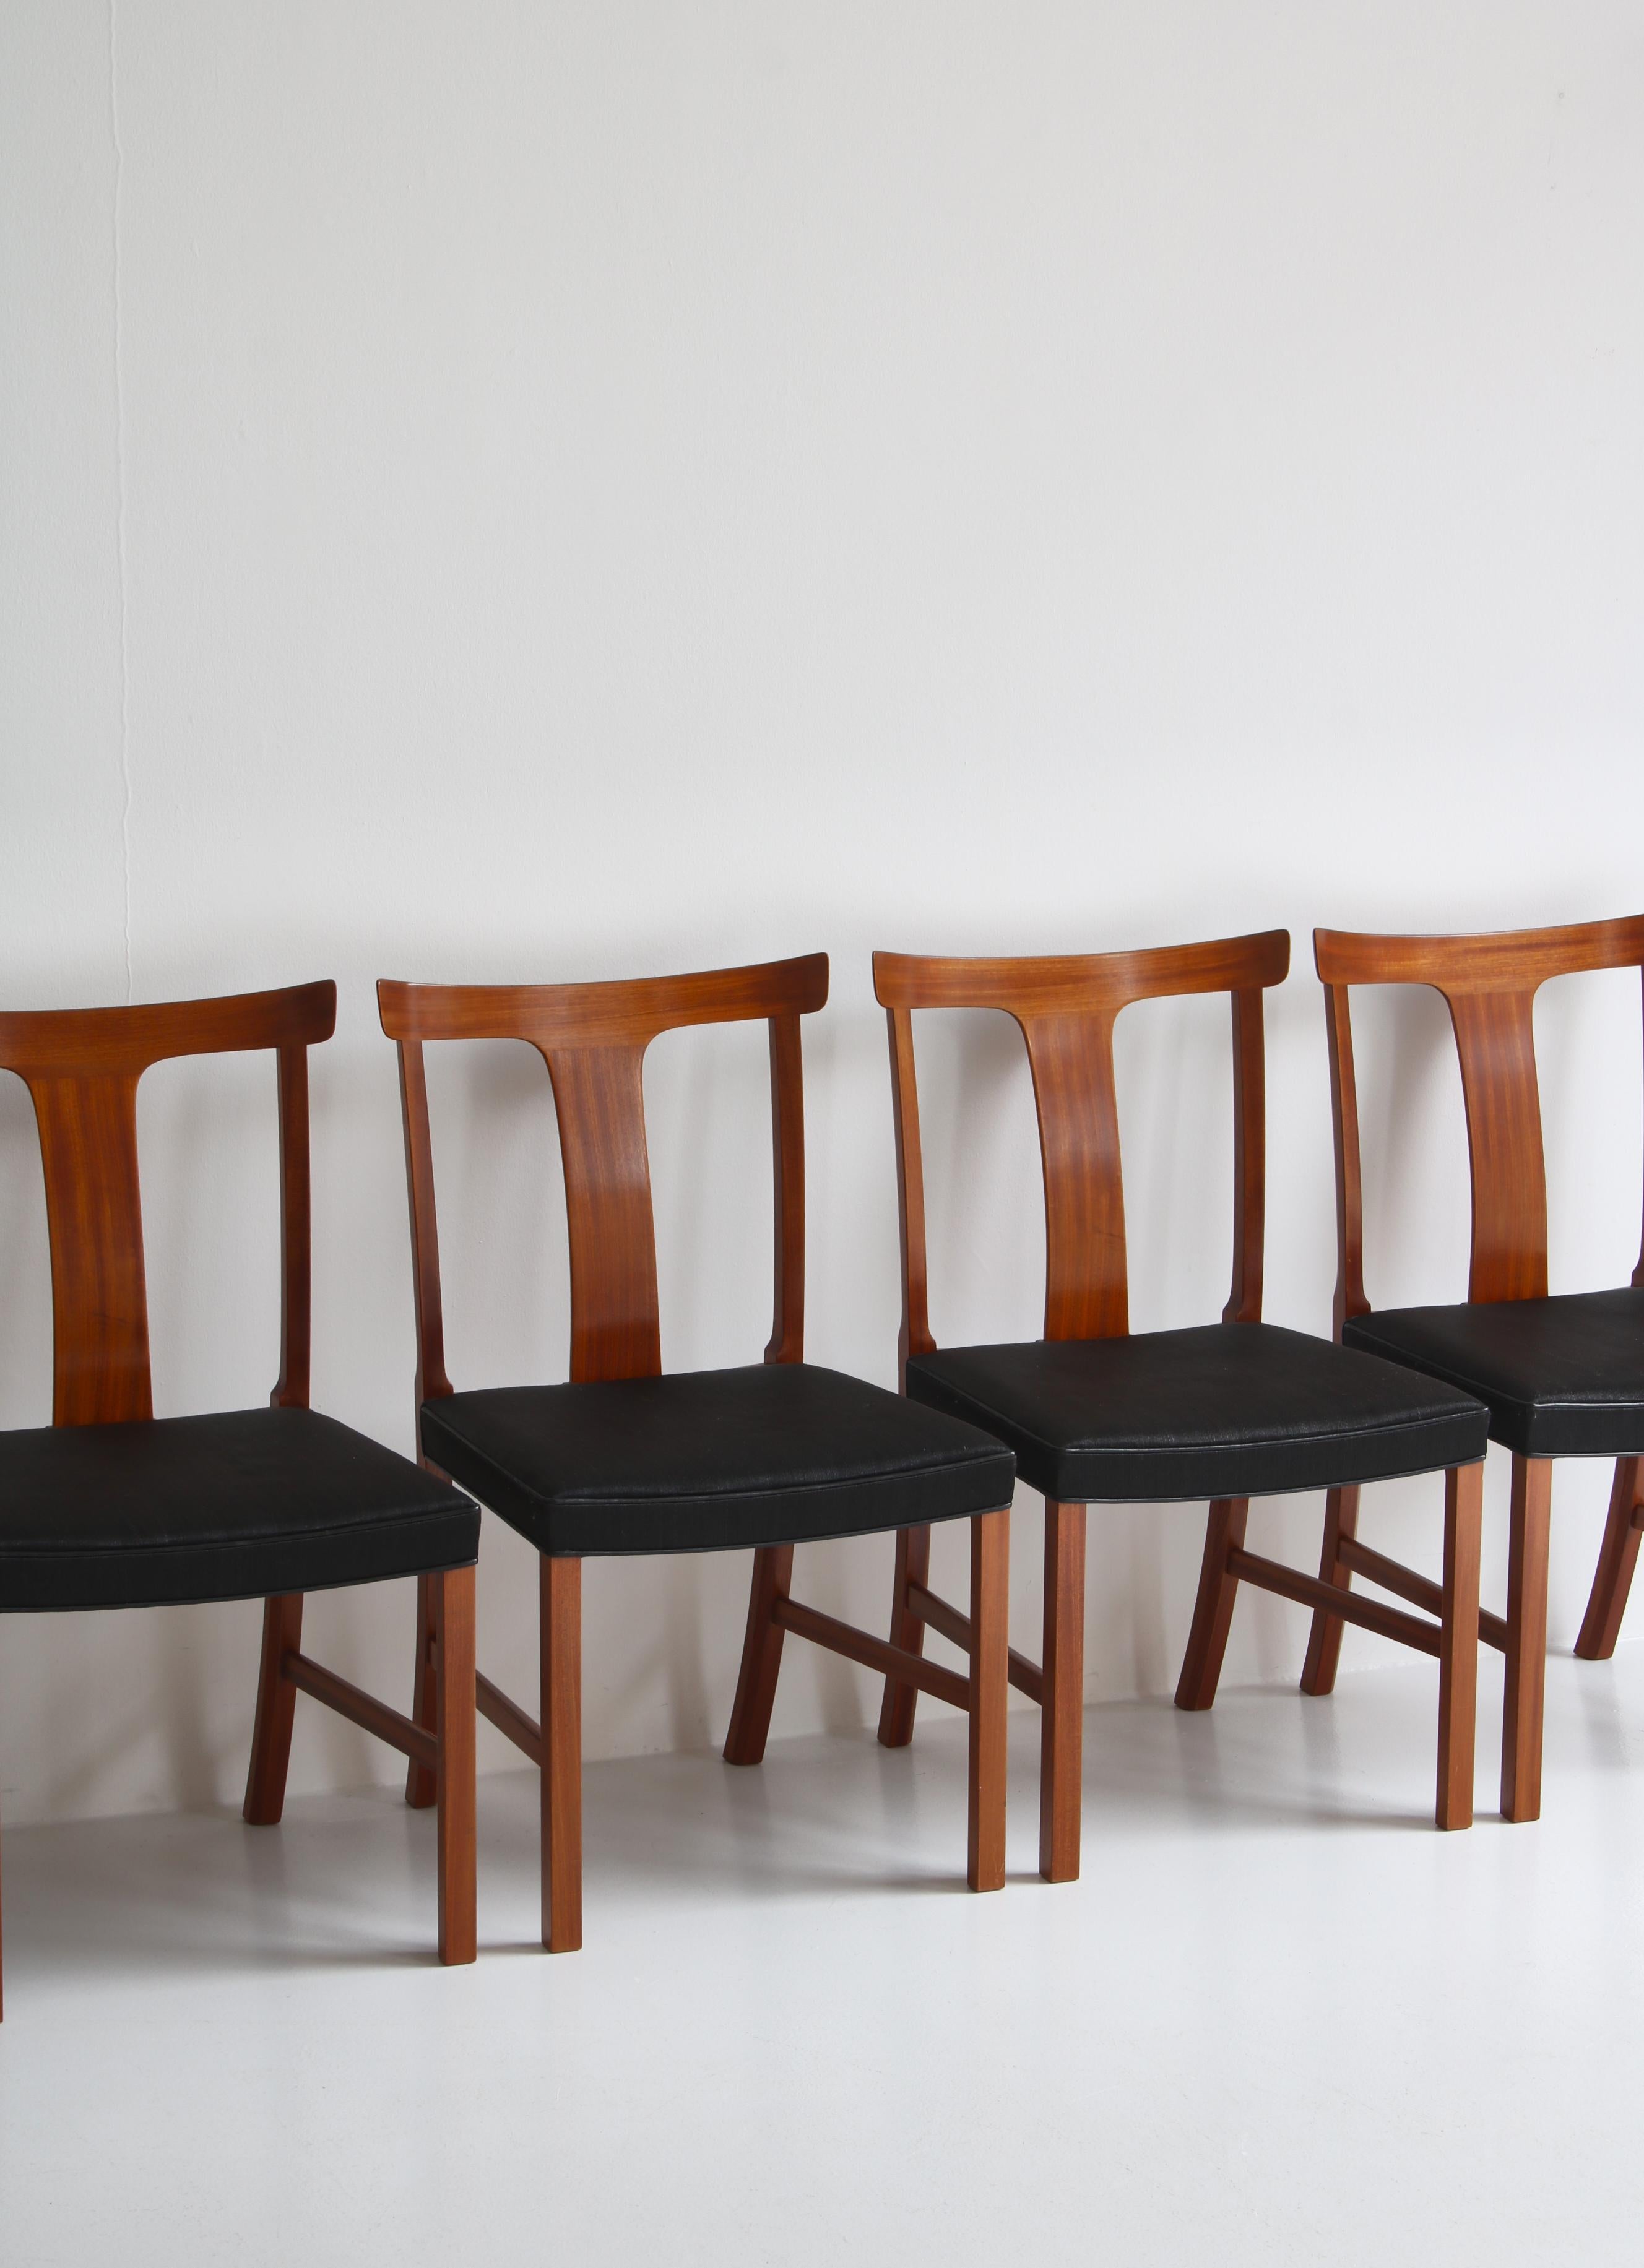 Mid-20th Century Ole Wanscher Dining Chairs in Mahogany and Horsehair Made by A.J. Iversen, 1960s For Sale